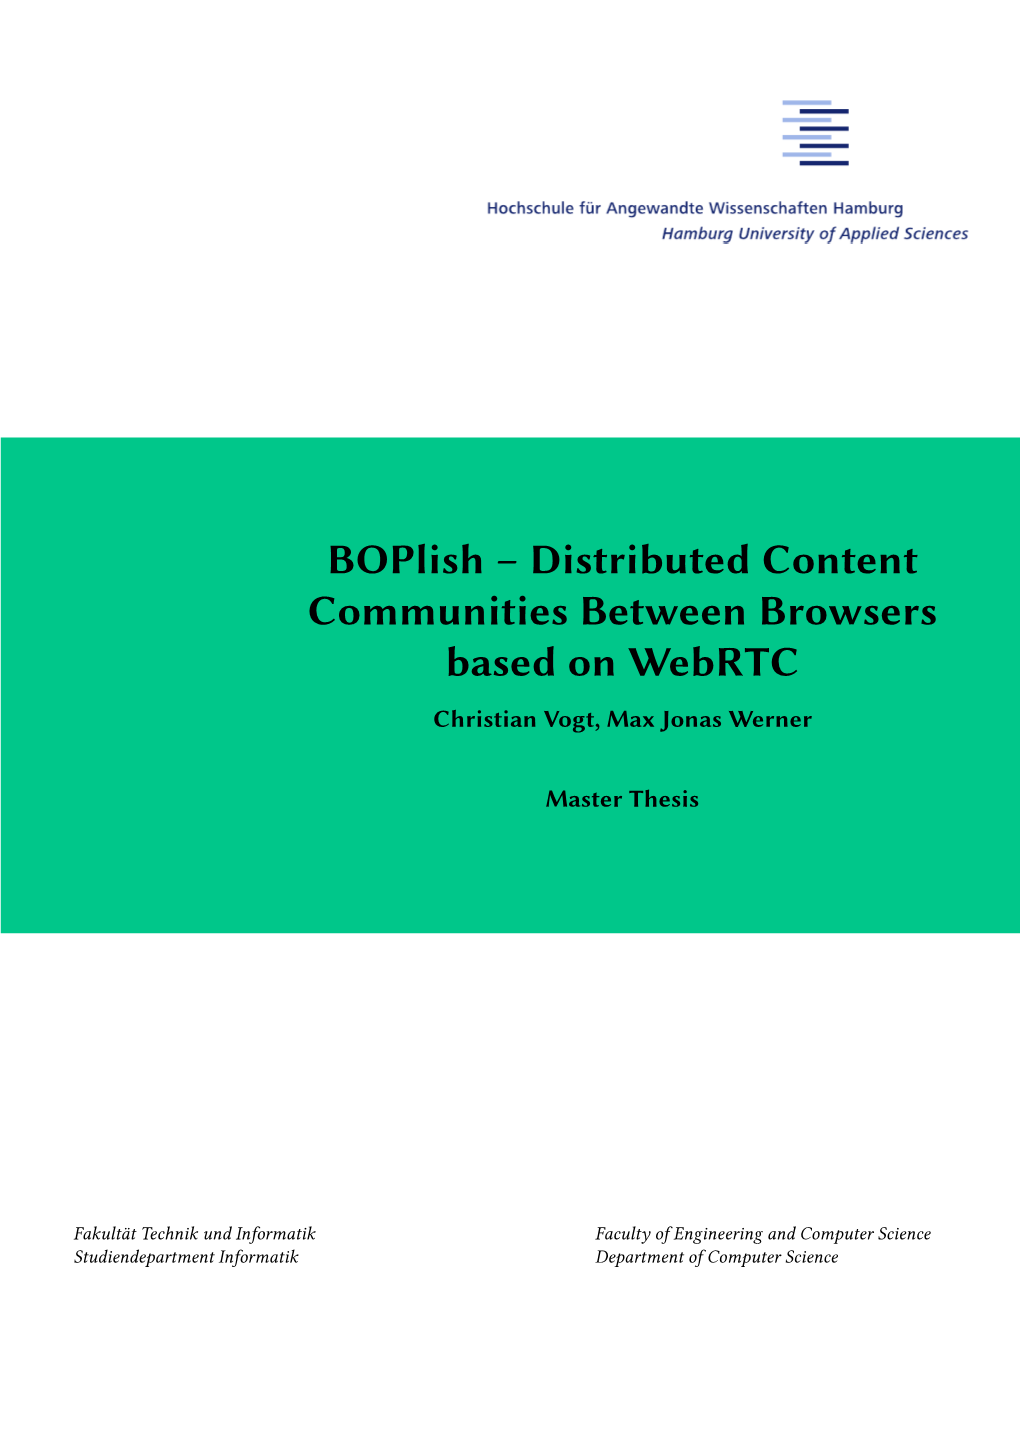 Distributed Content Communities Between Browsers Based on Webrtc Christian Vogt, Max Jonas Werner